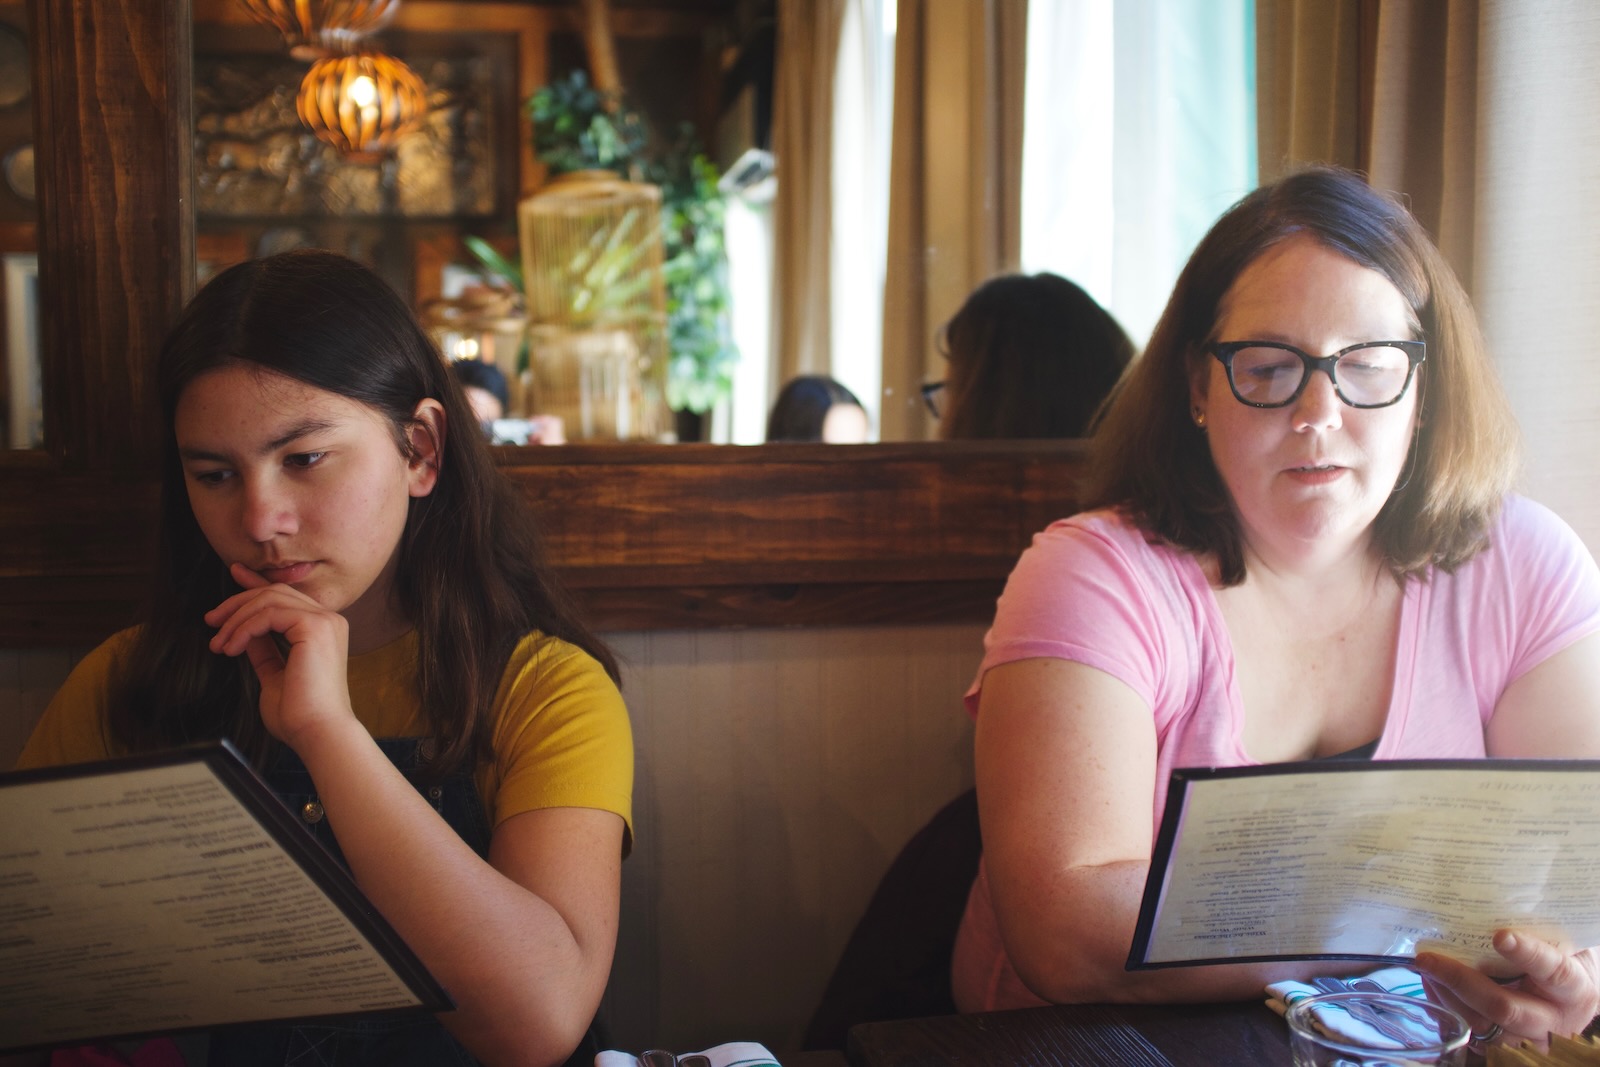 A teenage girl and a woman read menus. Behind them a mounted mirror reflects a restaurant interior.